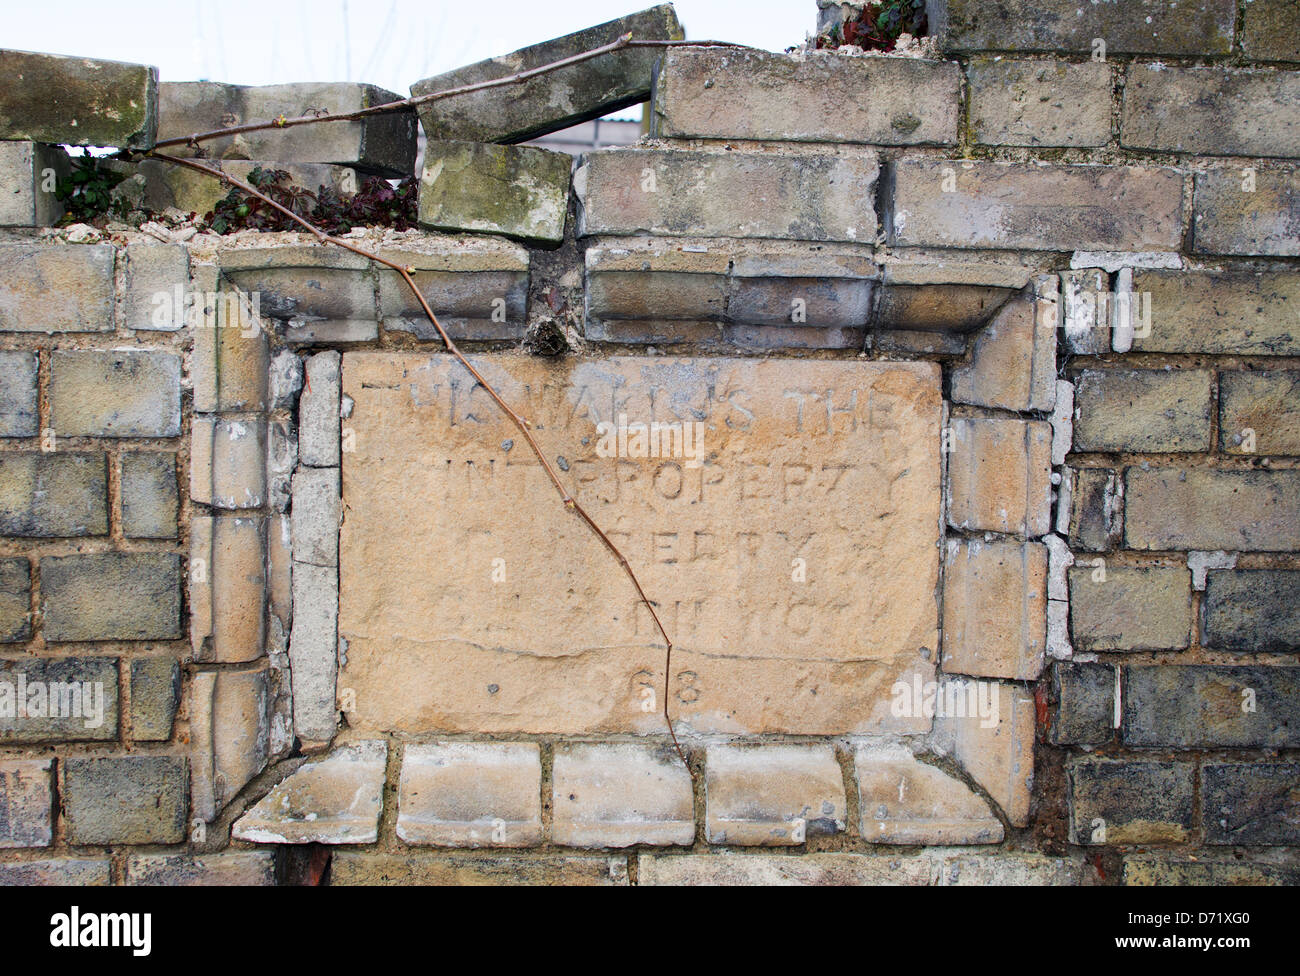 A stone tablet set in an old wall, marking the wall's ownership. The faded inscription suggests 19th Century. Stock Photo